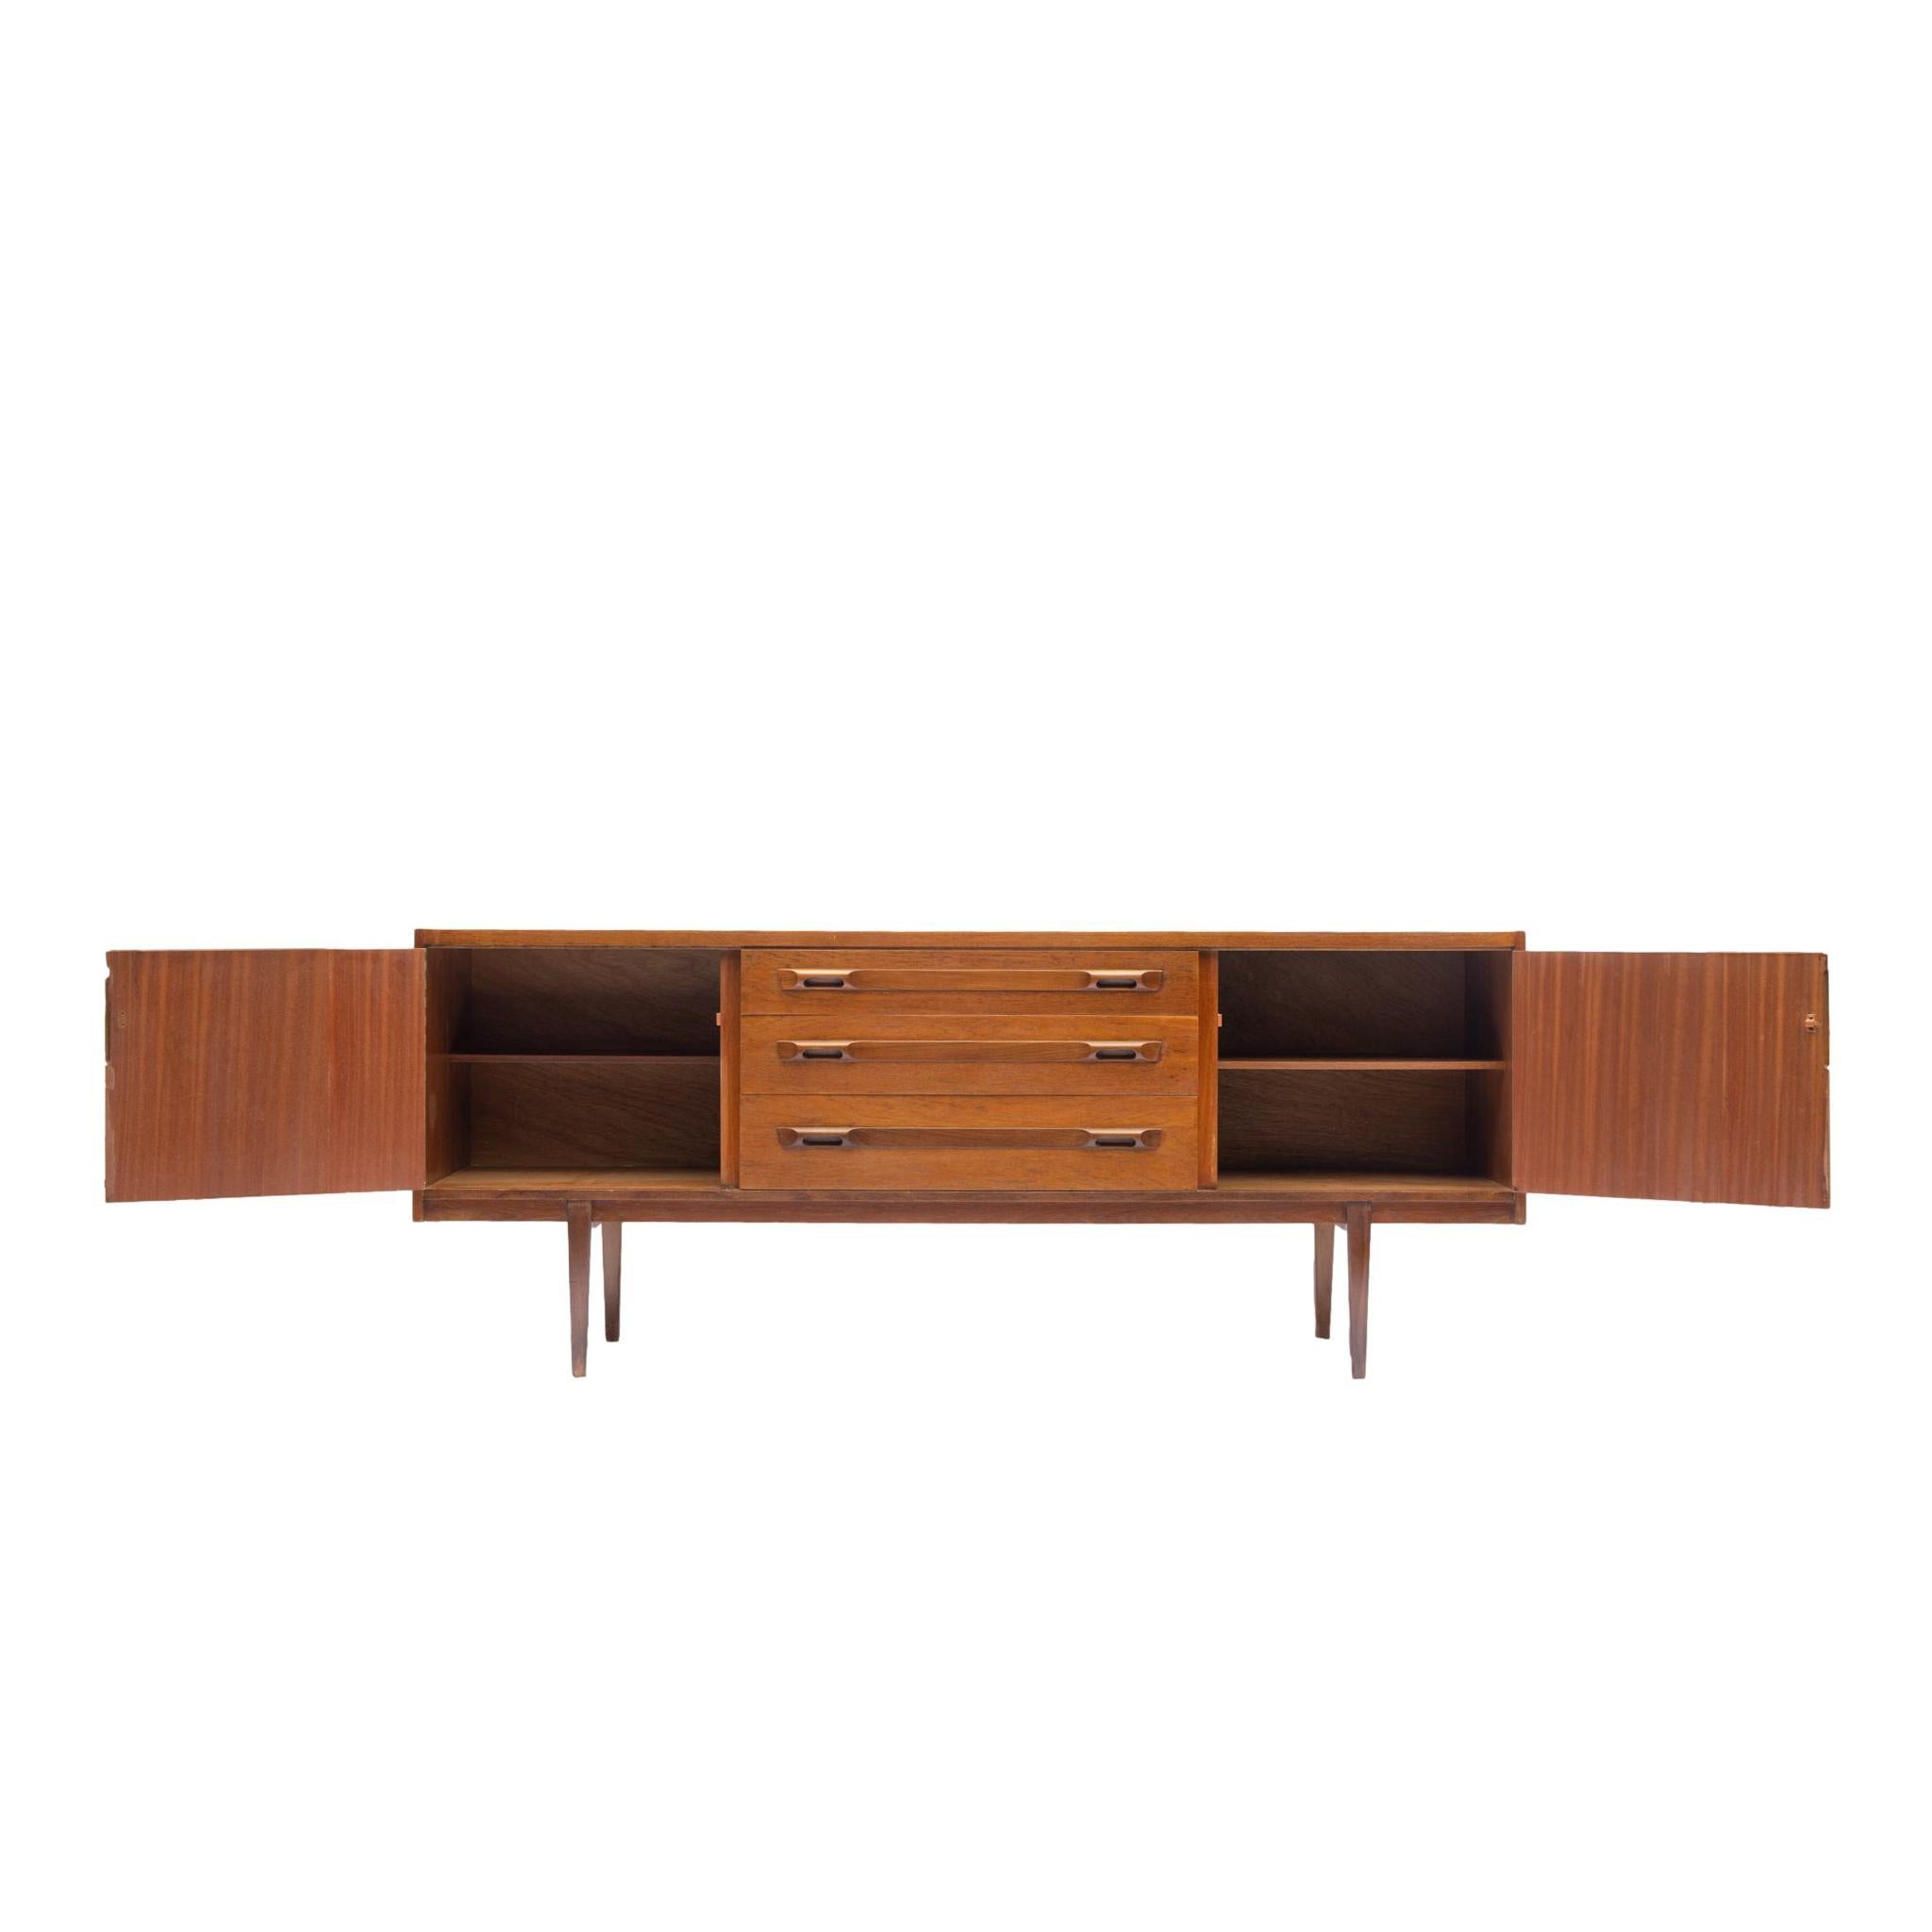 A Mid-Century Modern Teak and Afromosia Sideboard by Wrighton of Danish Modern form, the center section with three drawers, the top one fitted for cutlery, each with sculpted organic pulls, with cabinet doors to either side, English, circa 1960.